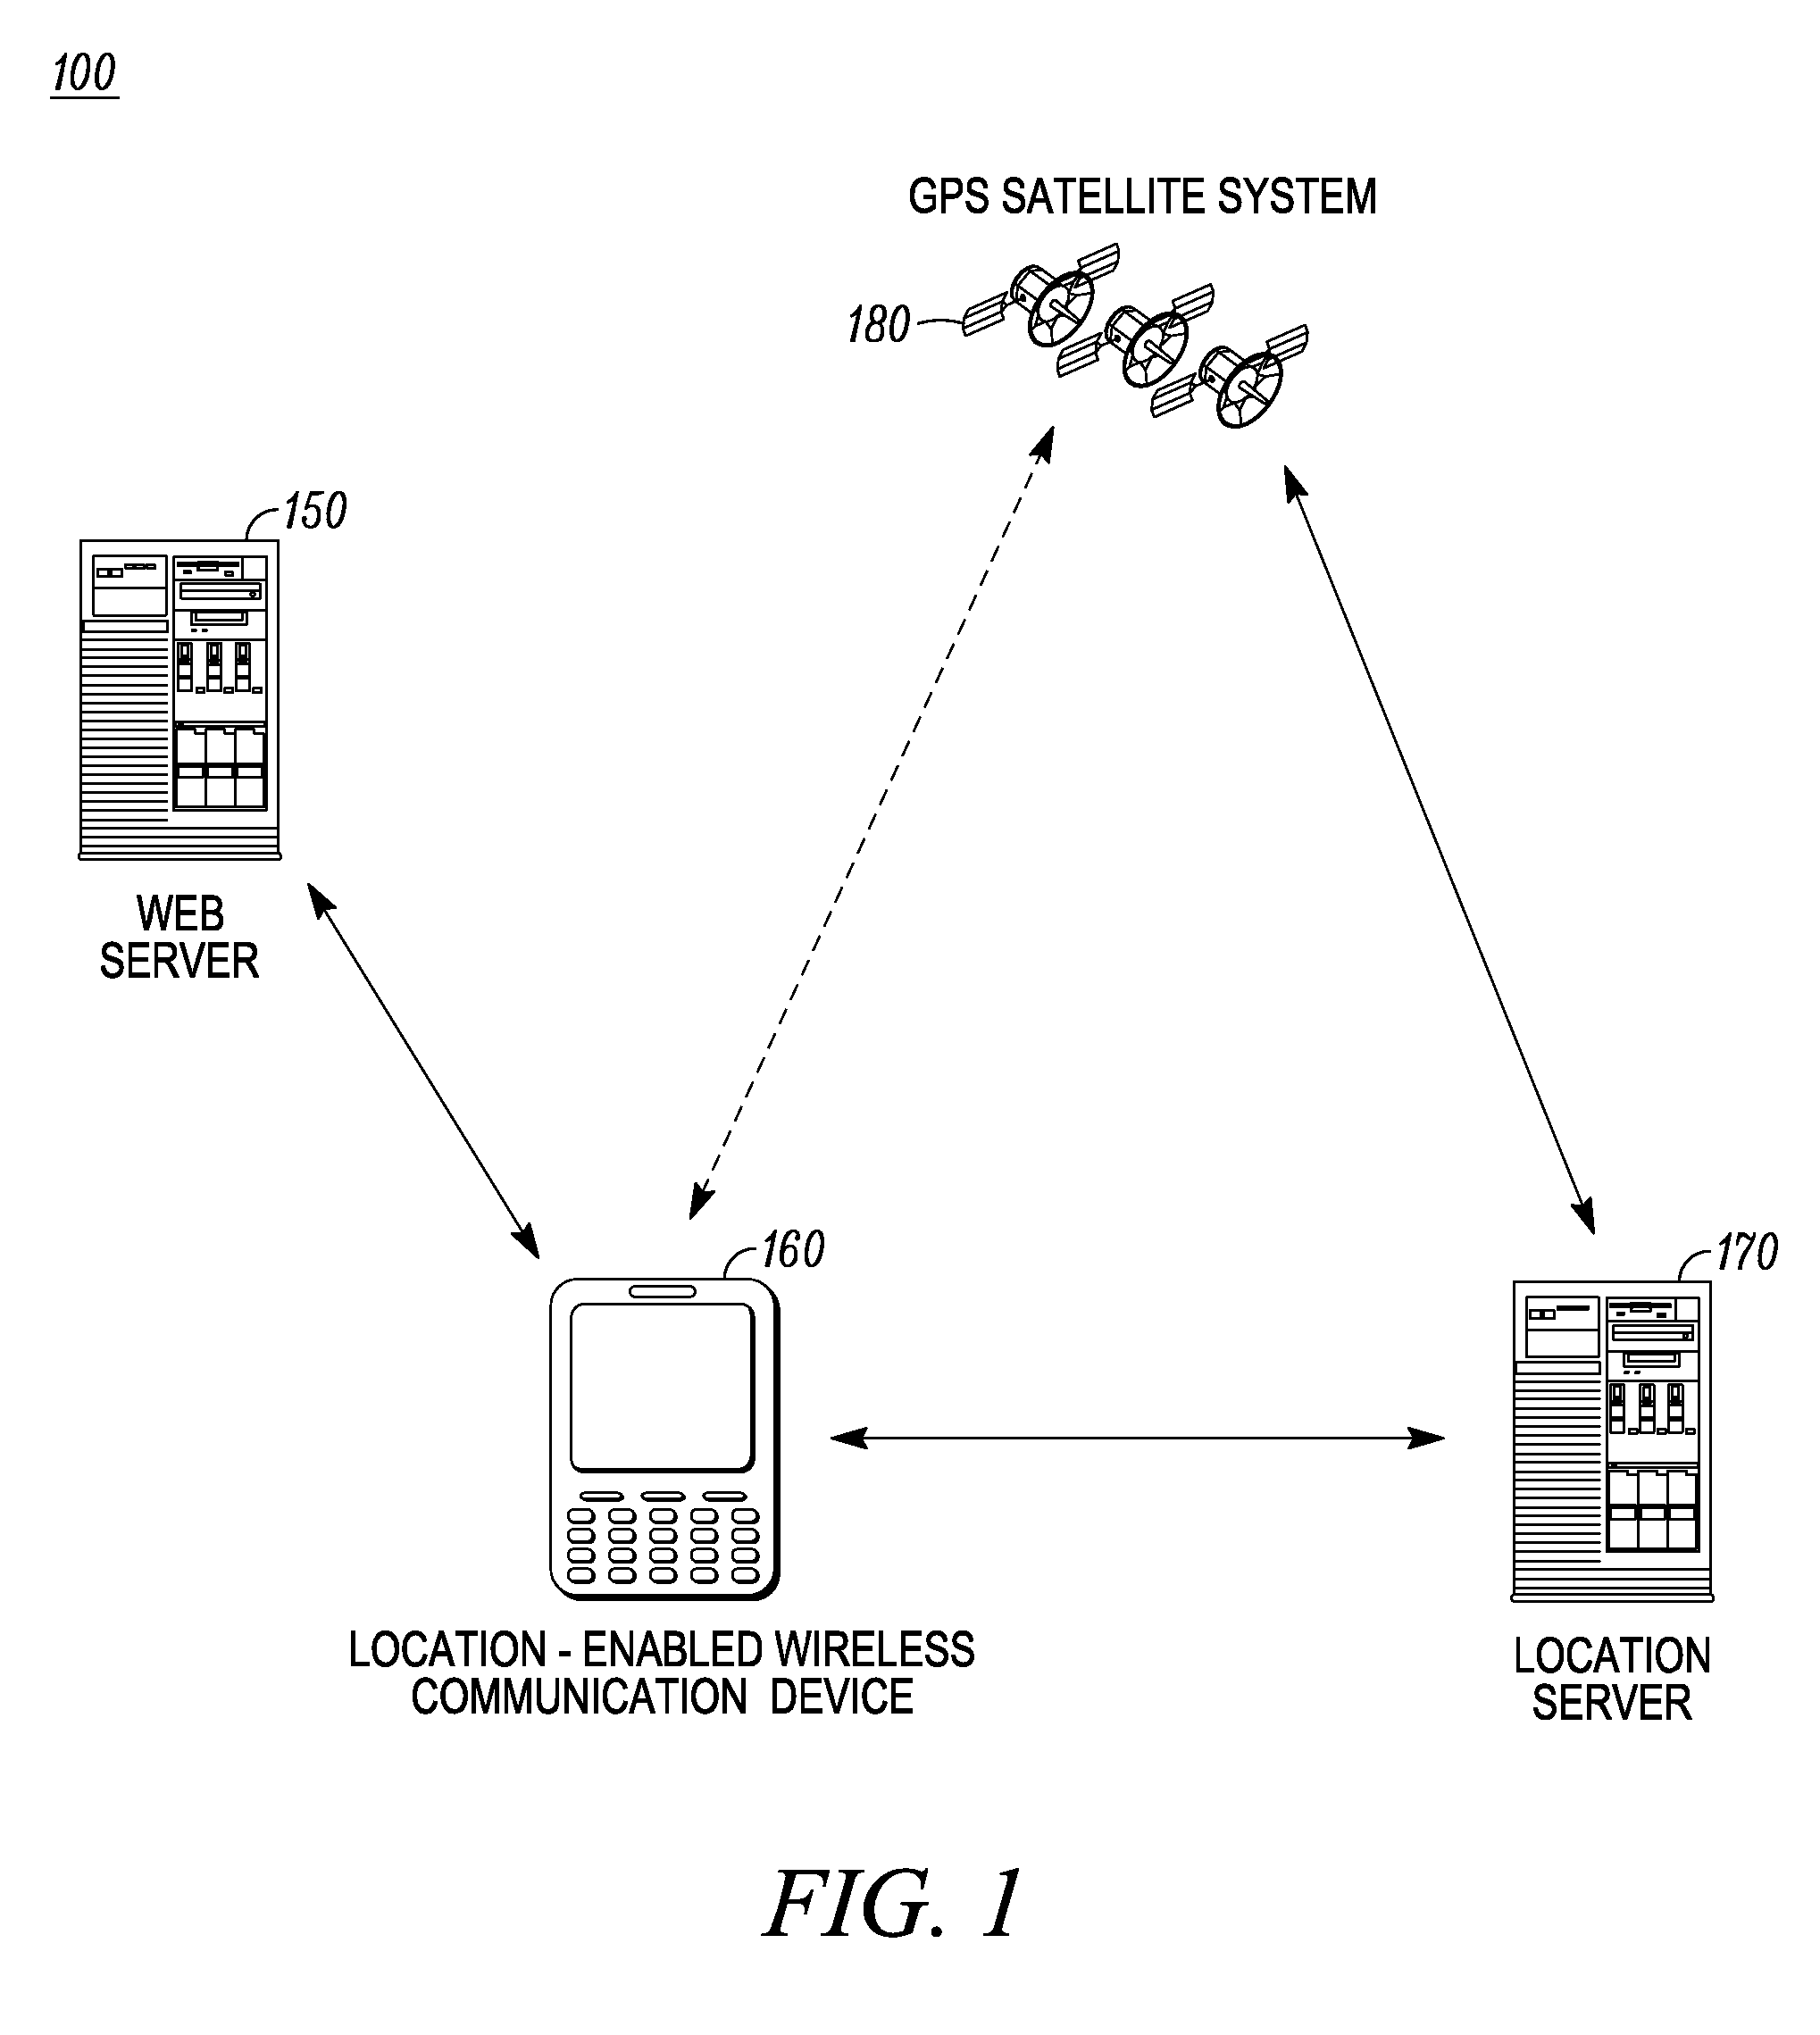 Method and Apparatus for Providing Location-Based Information